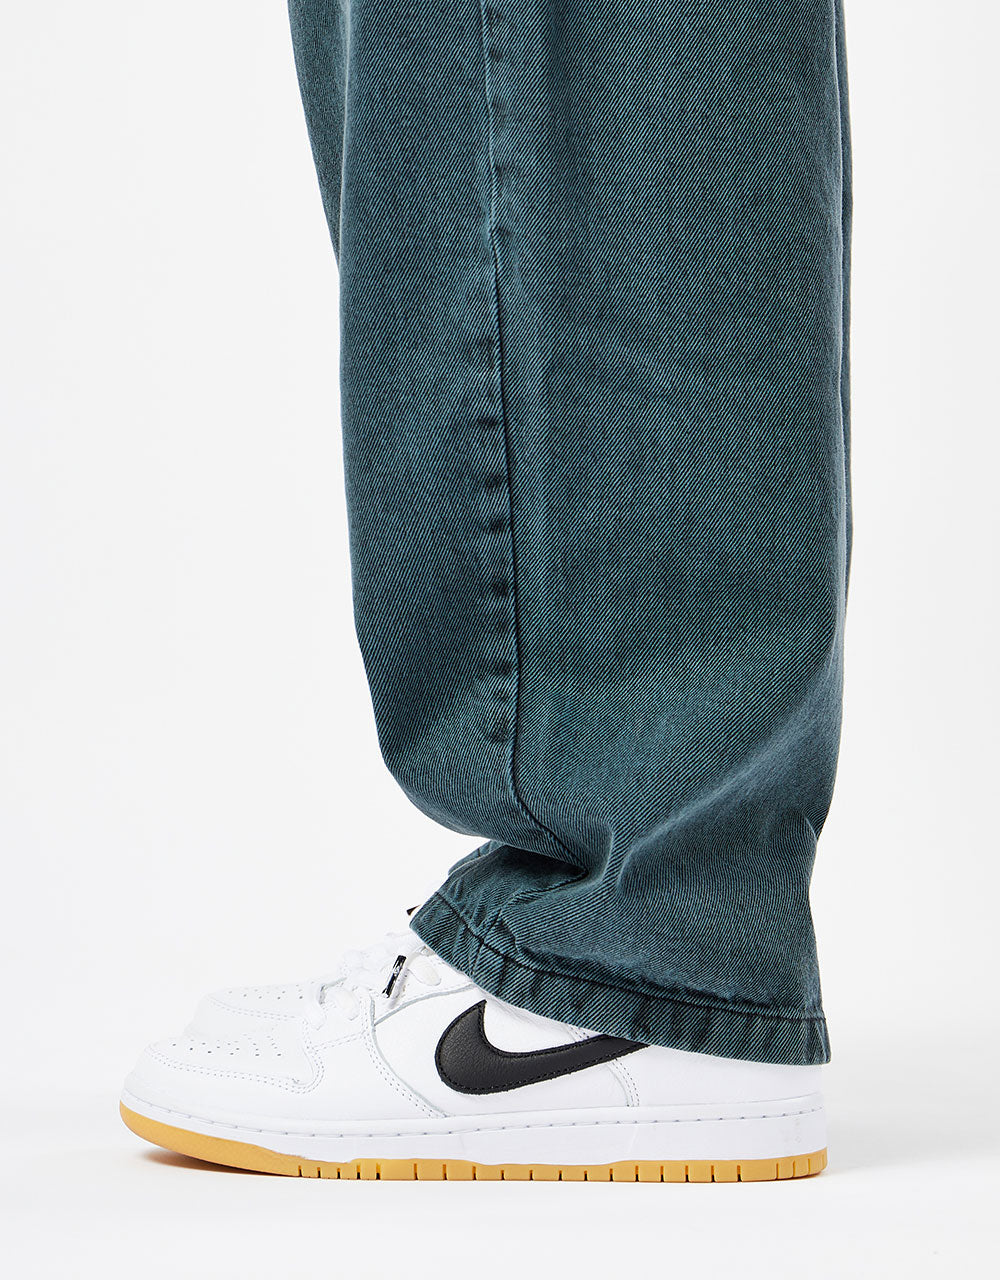 Route One Super Baggy Denim Jeans - Shaded Spruce